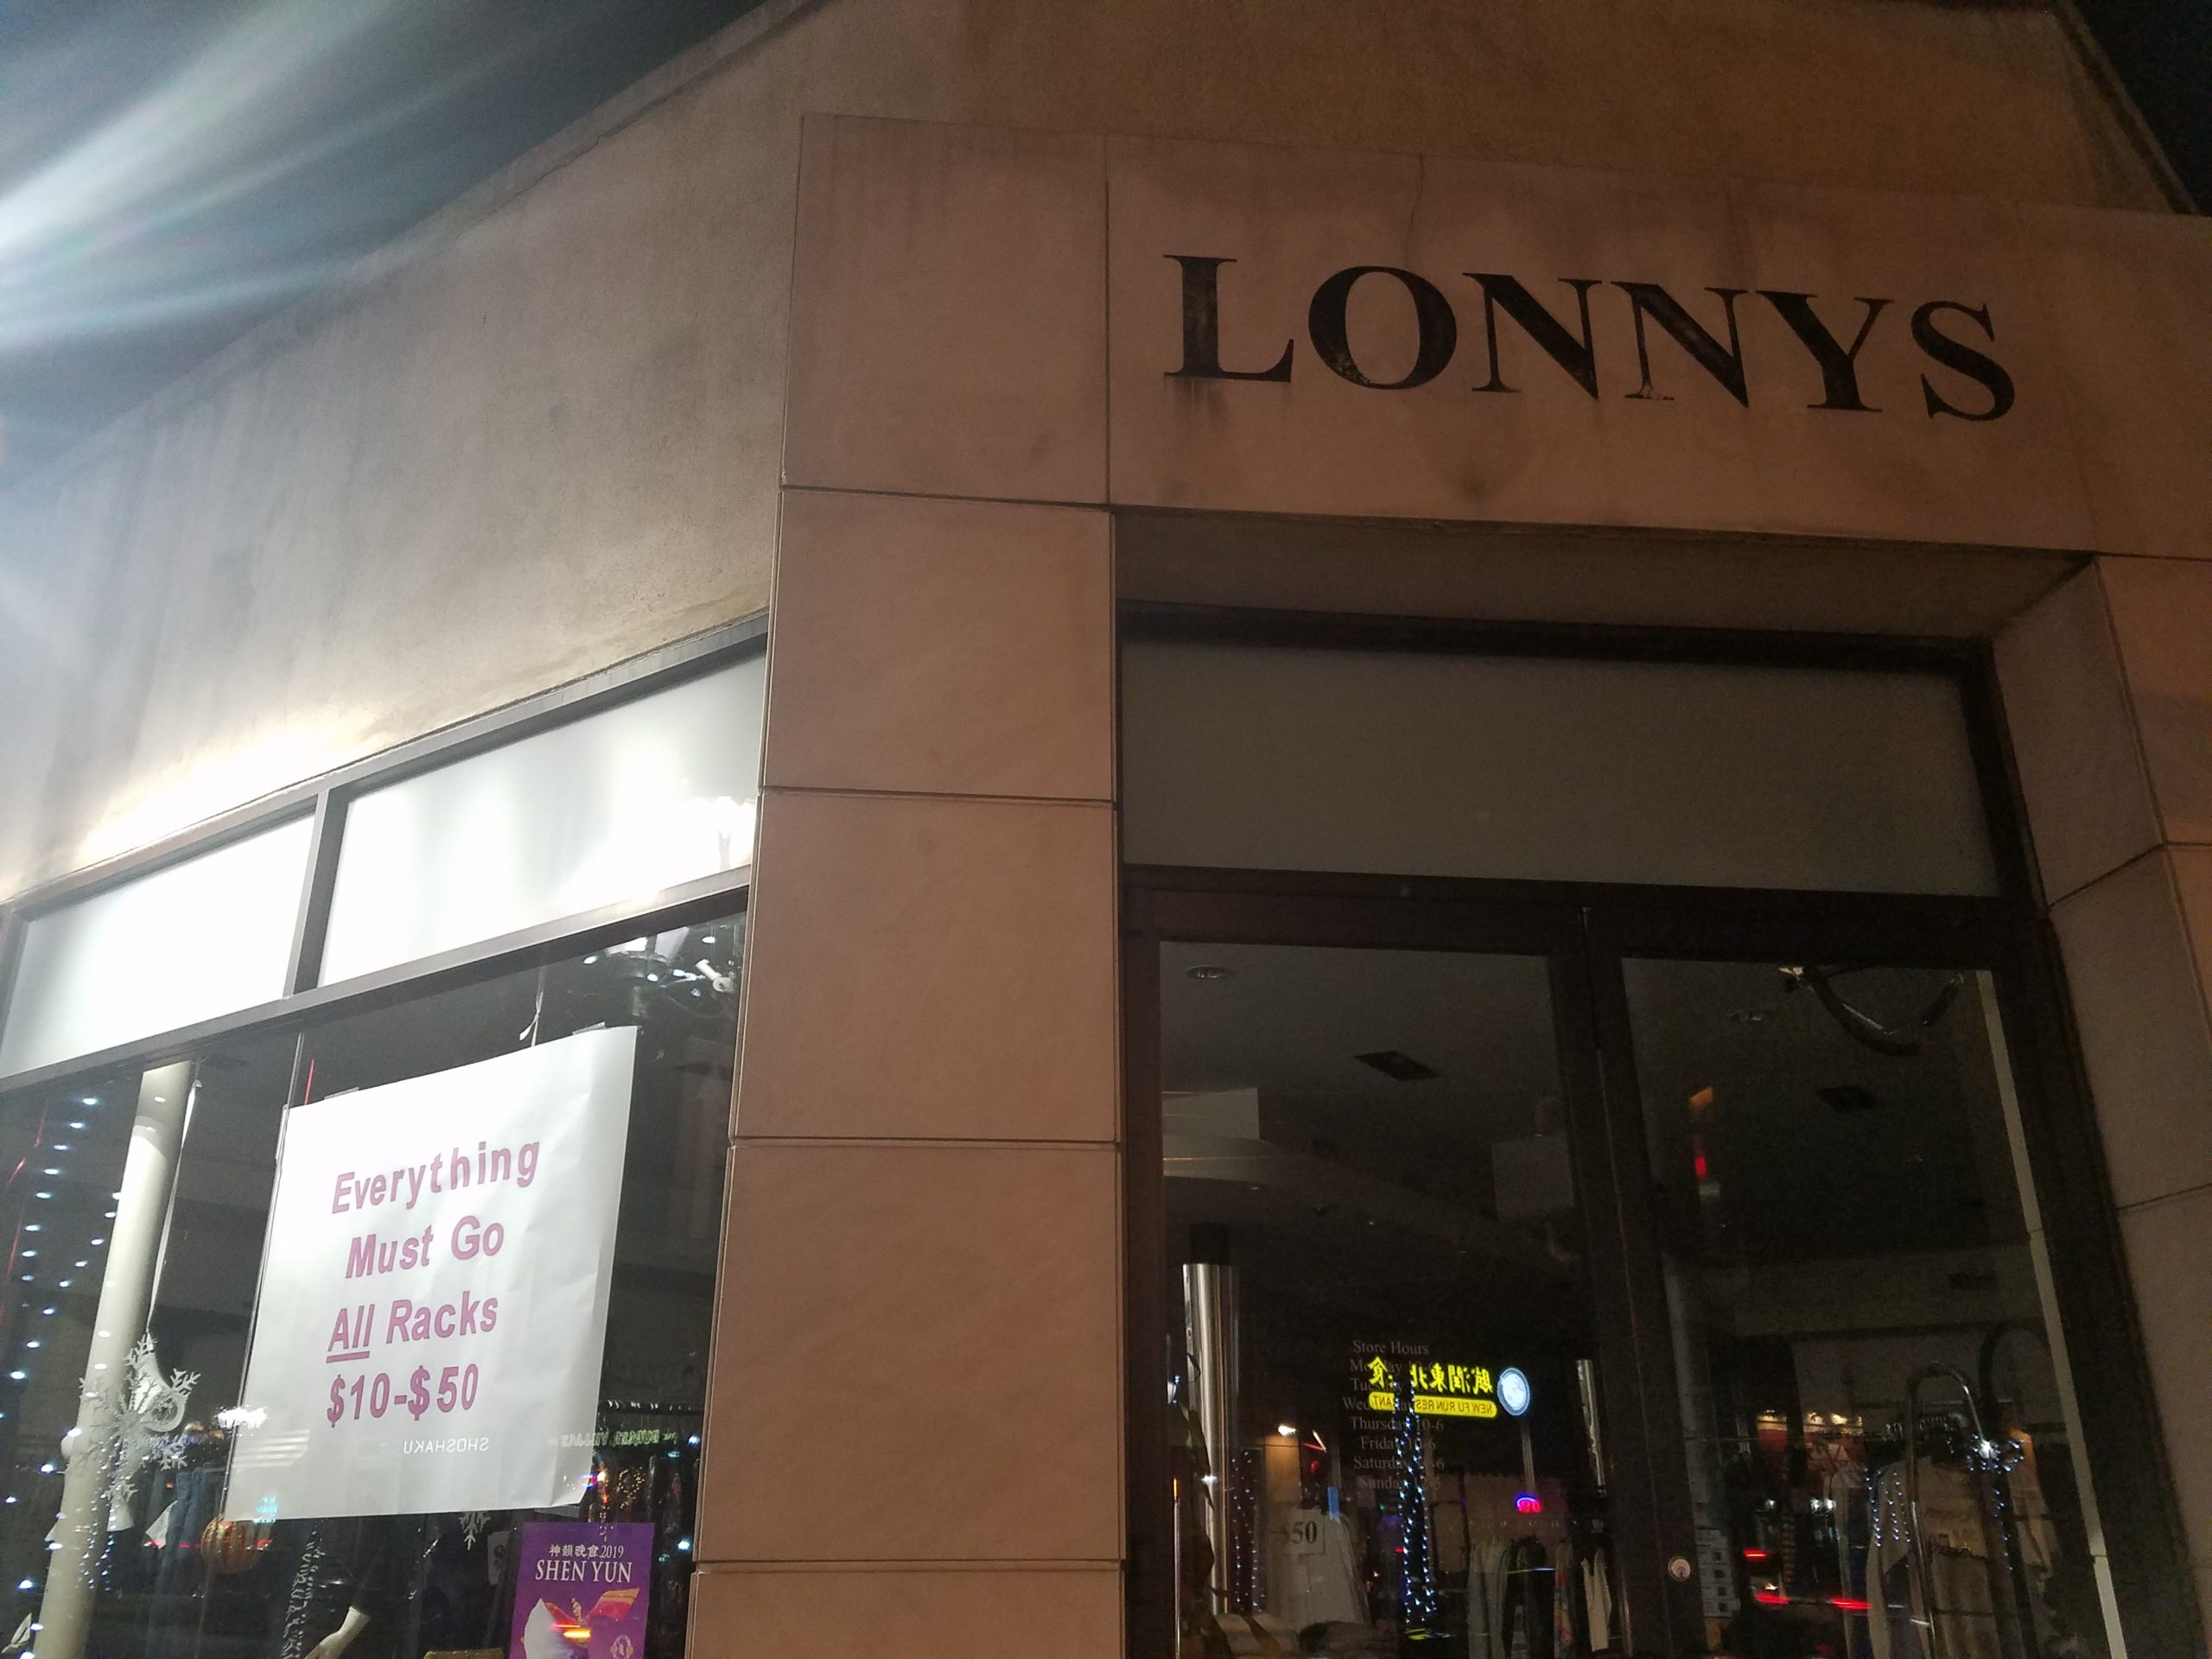 Lonny's Wardrobe of Great Neck, better known as Lonny's, will be closing down at the end of the month after about 30 years in business. (Photo by Janelle Clausen)